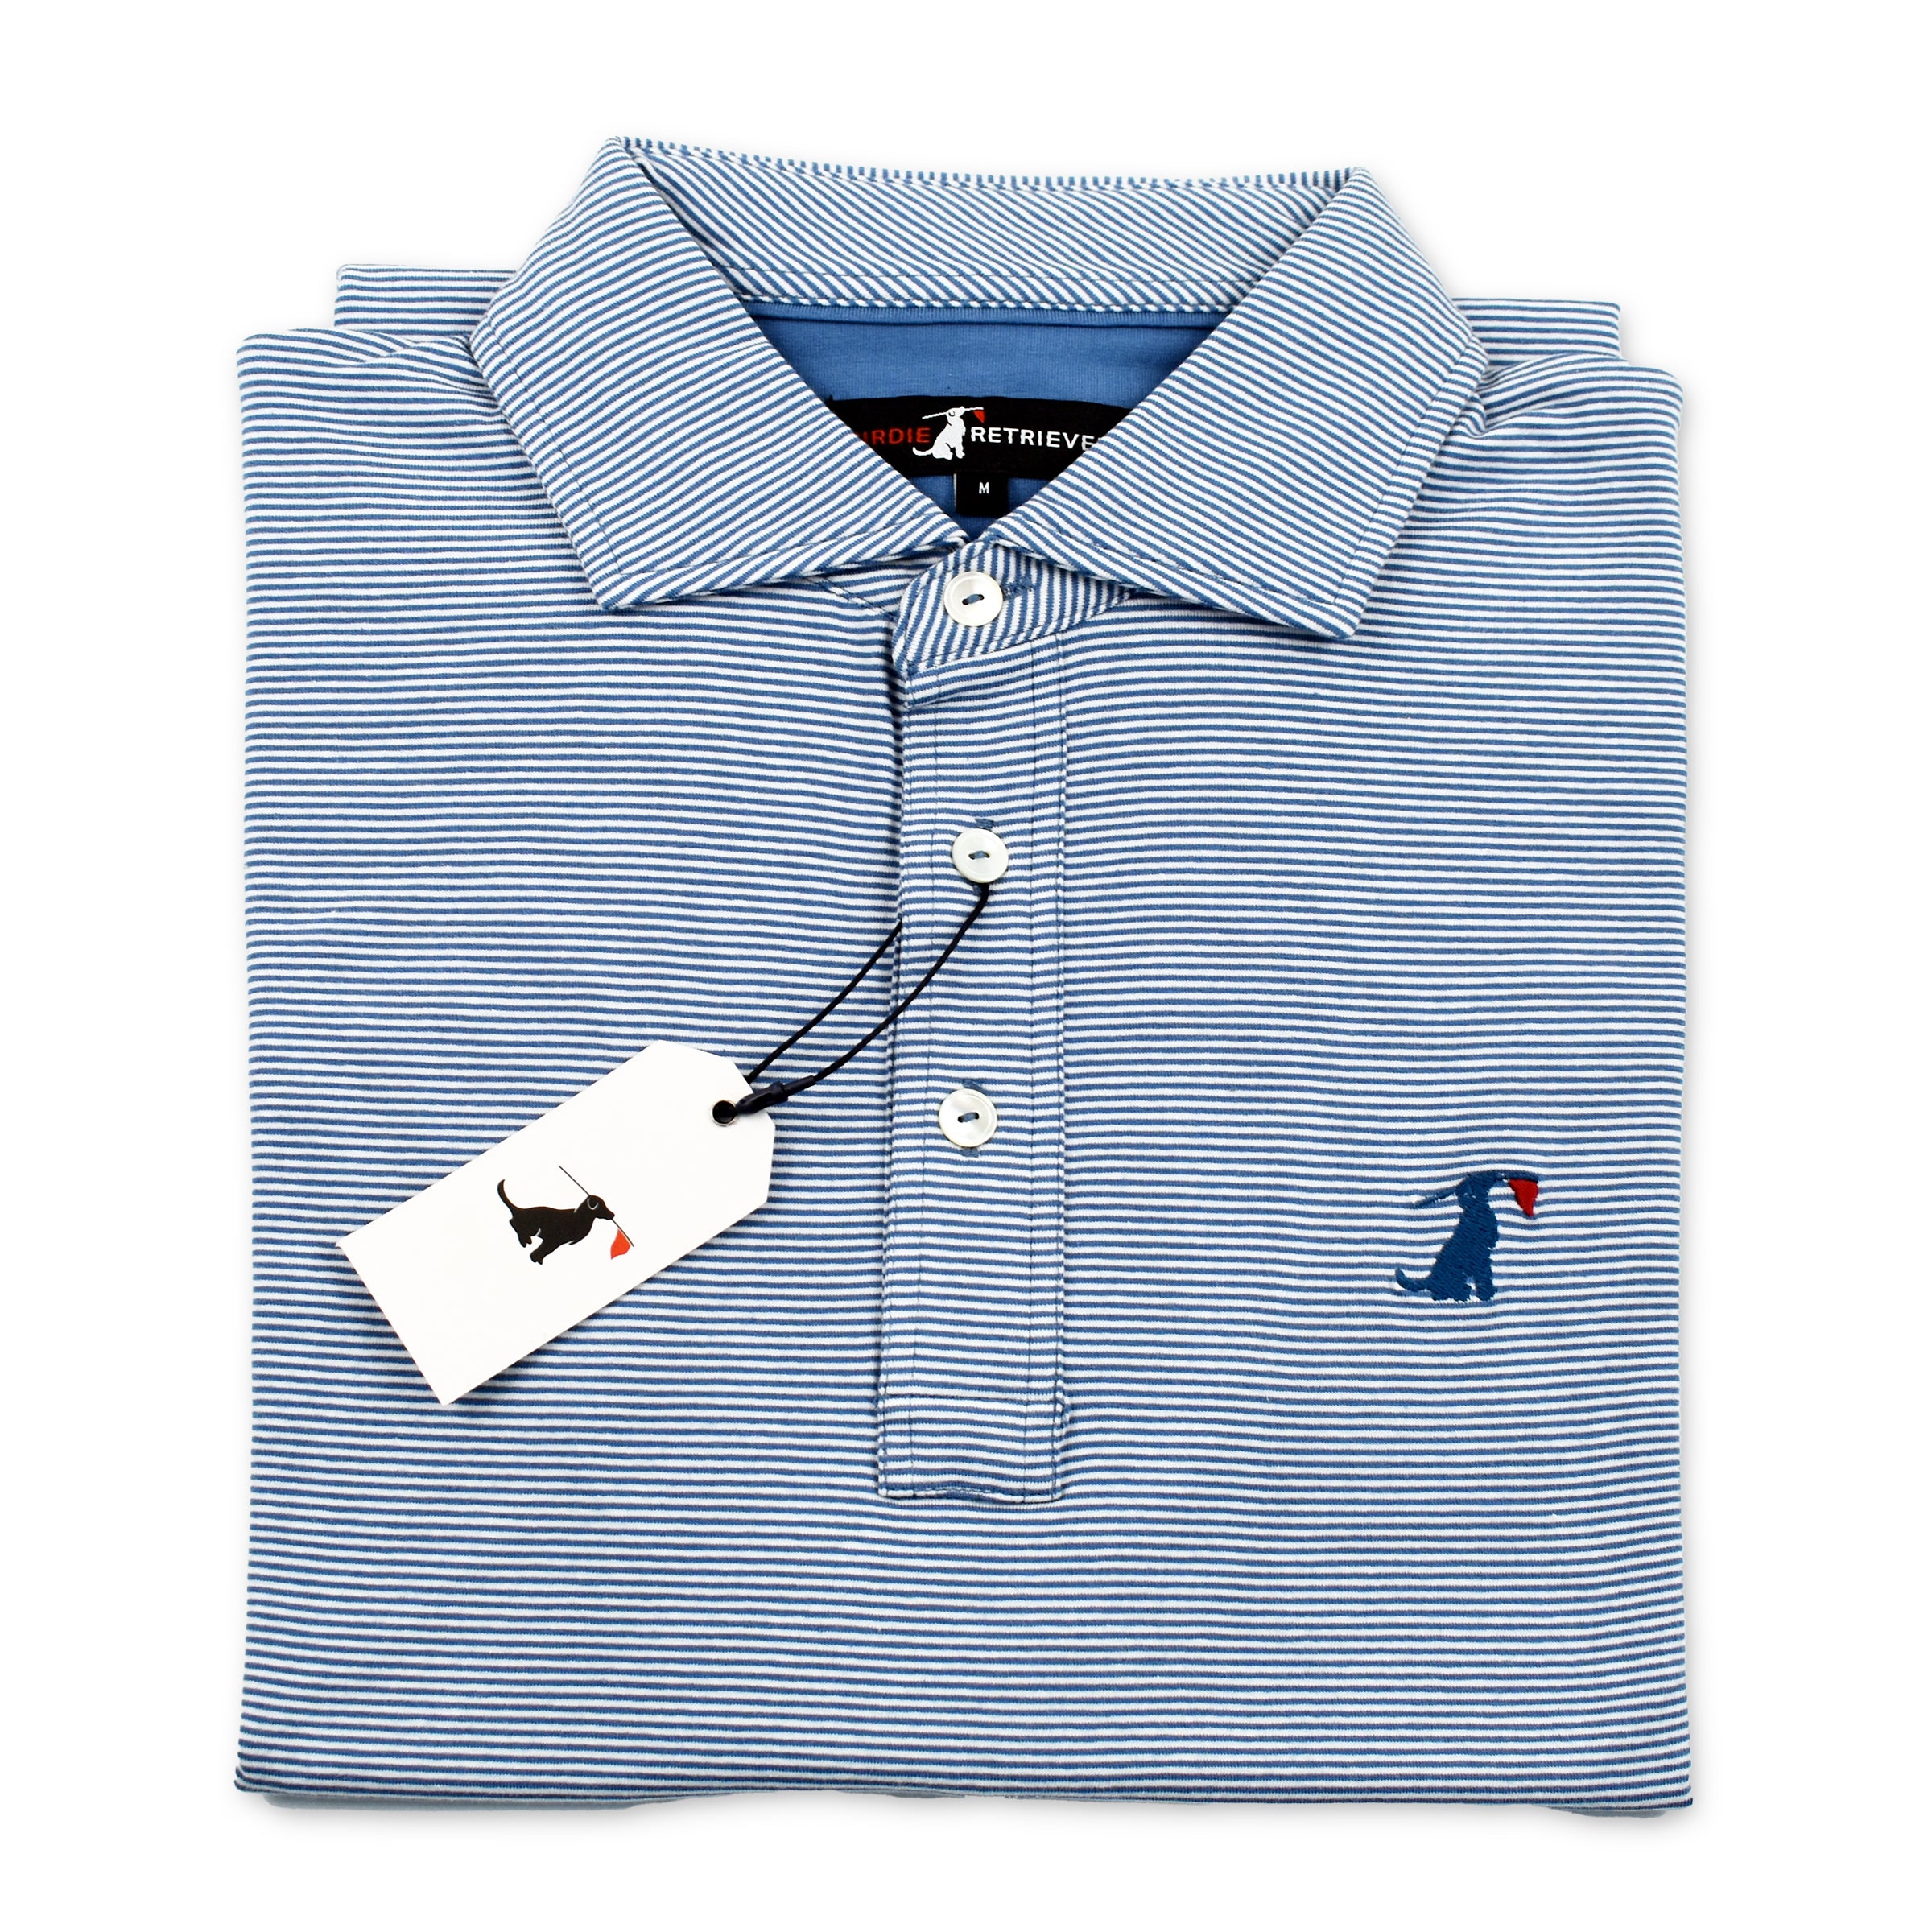 The Admiral Performance Cotton Polo Shirt